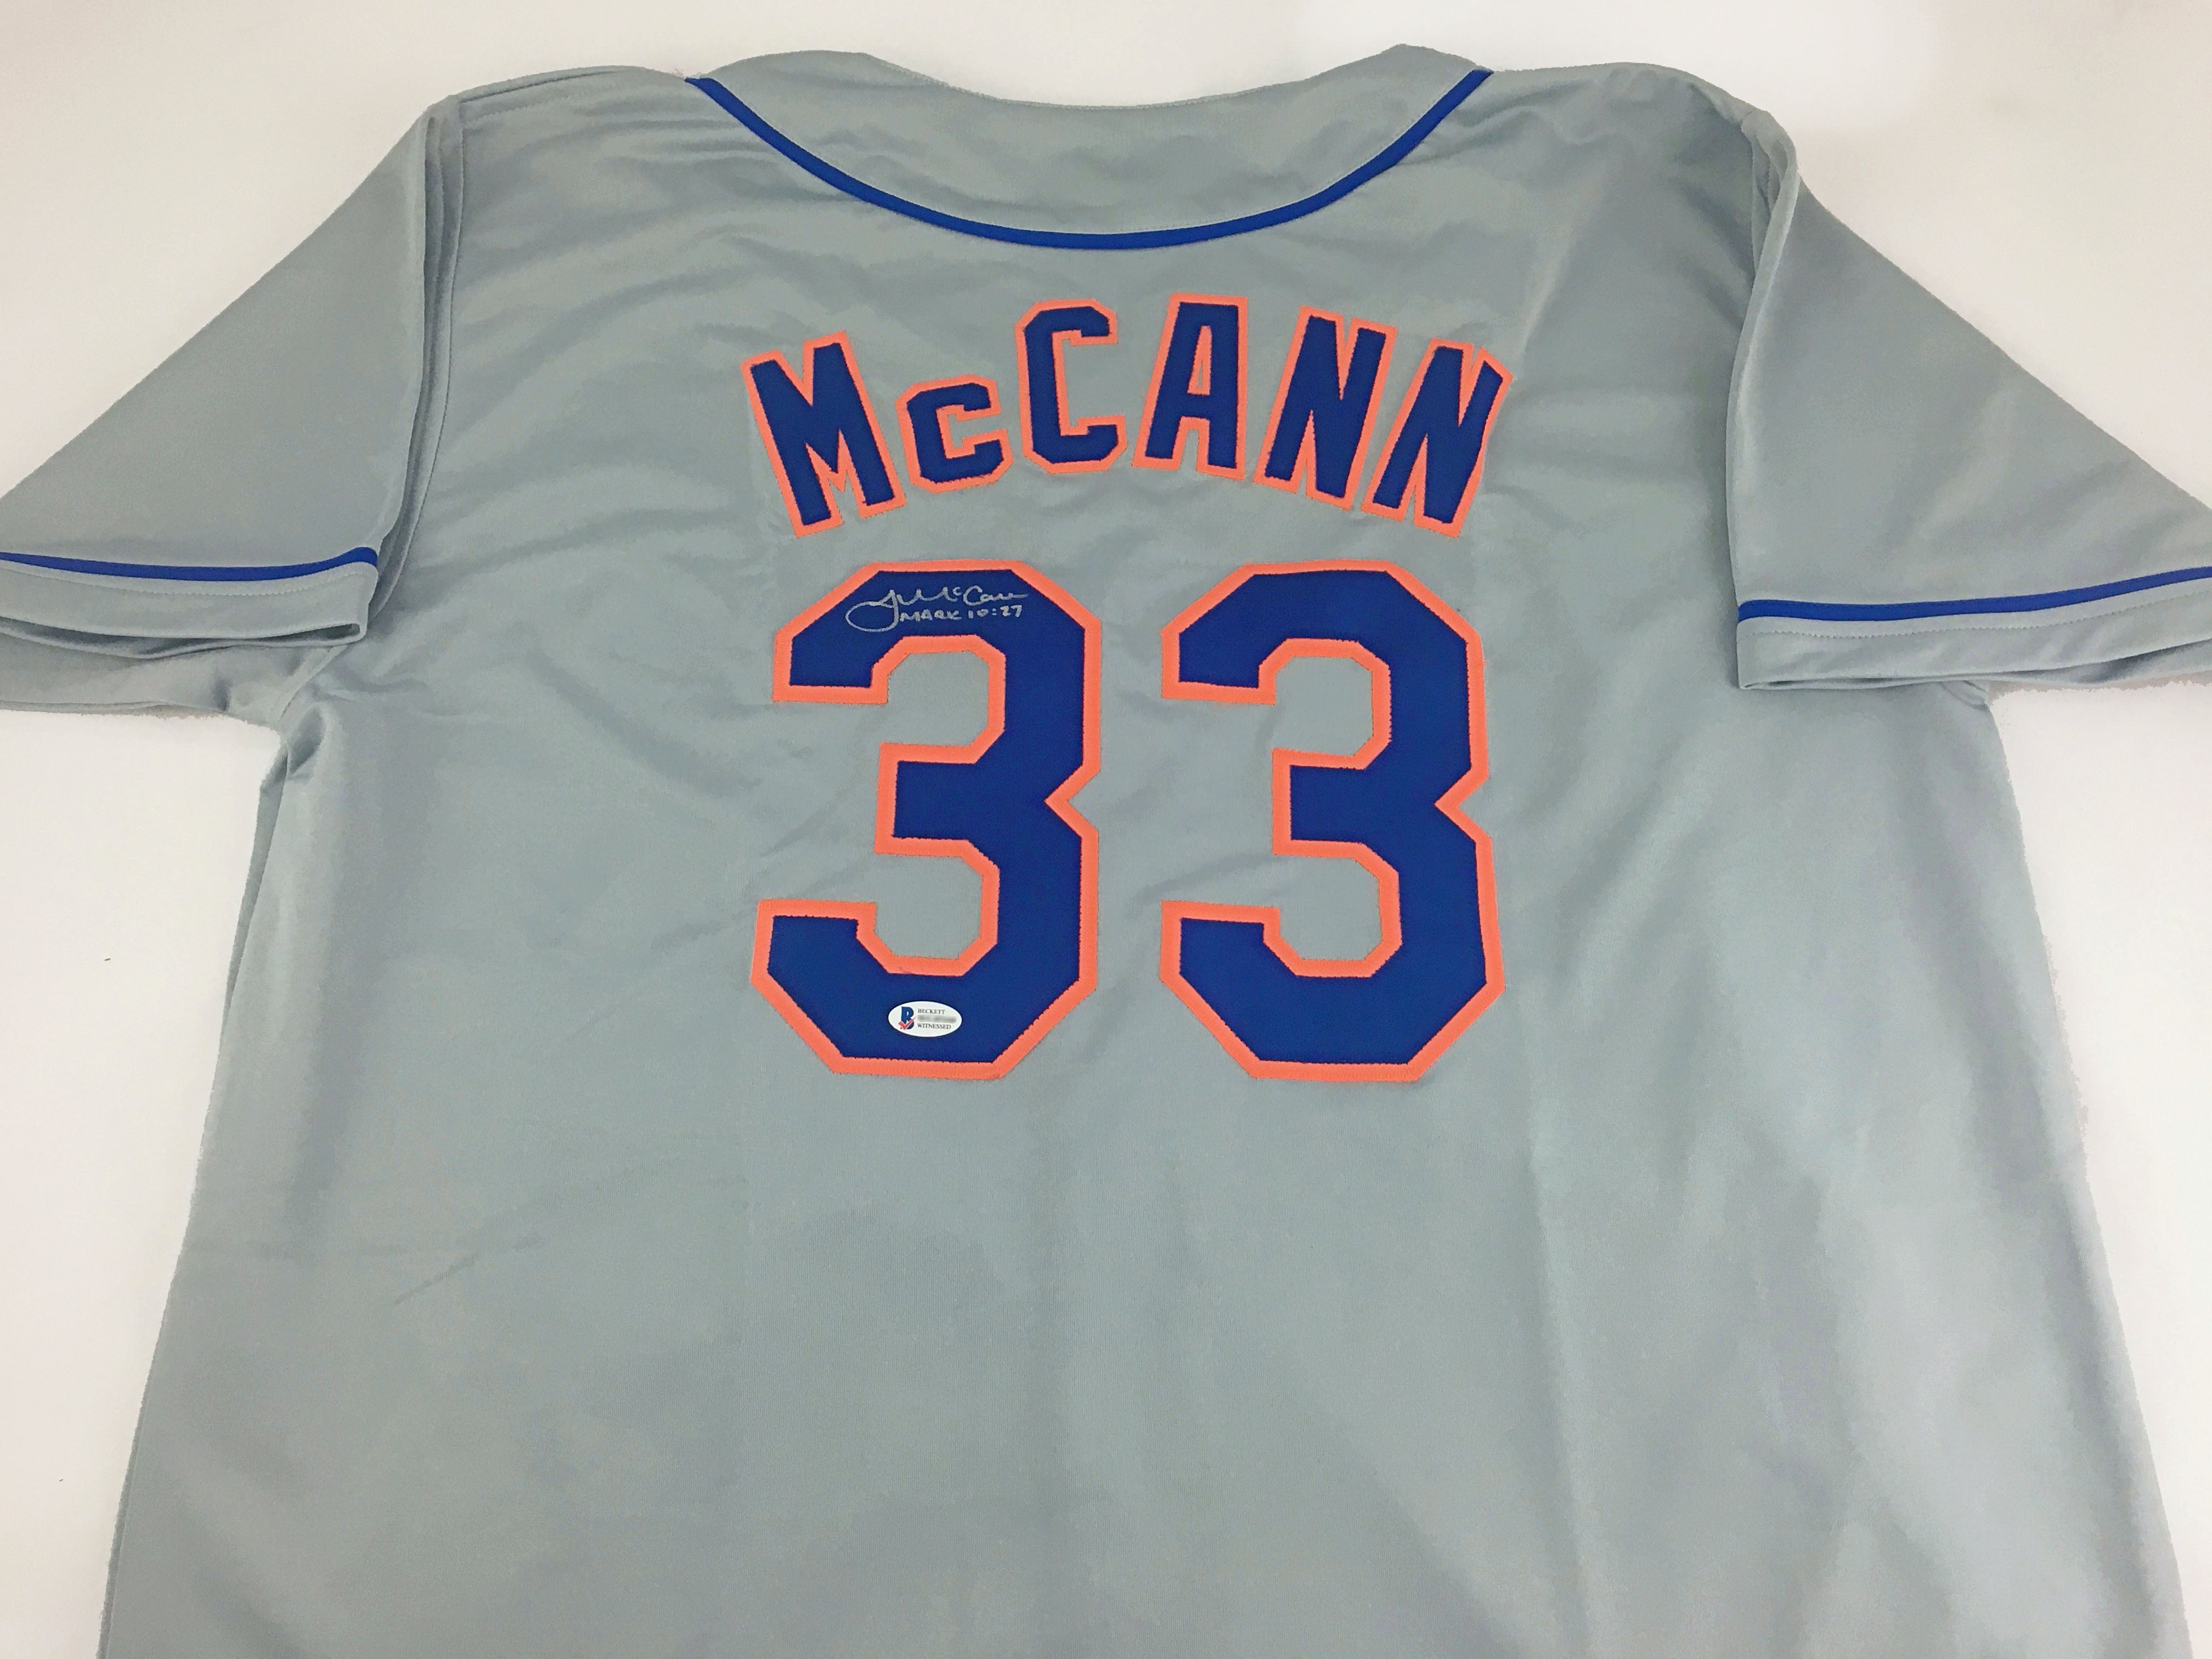 New York Mets Game Used MLB Jerseys for sale